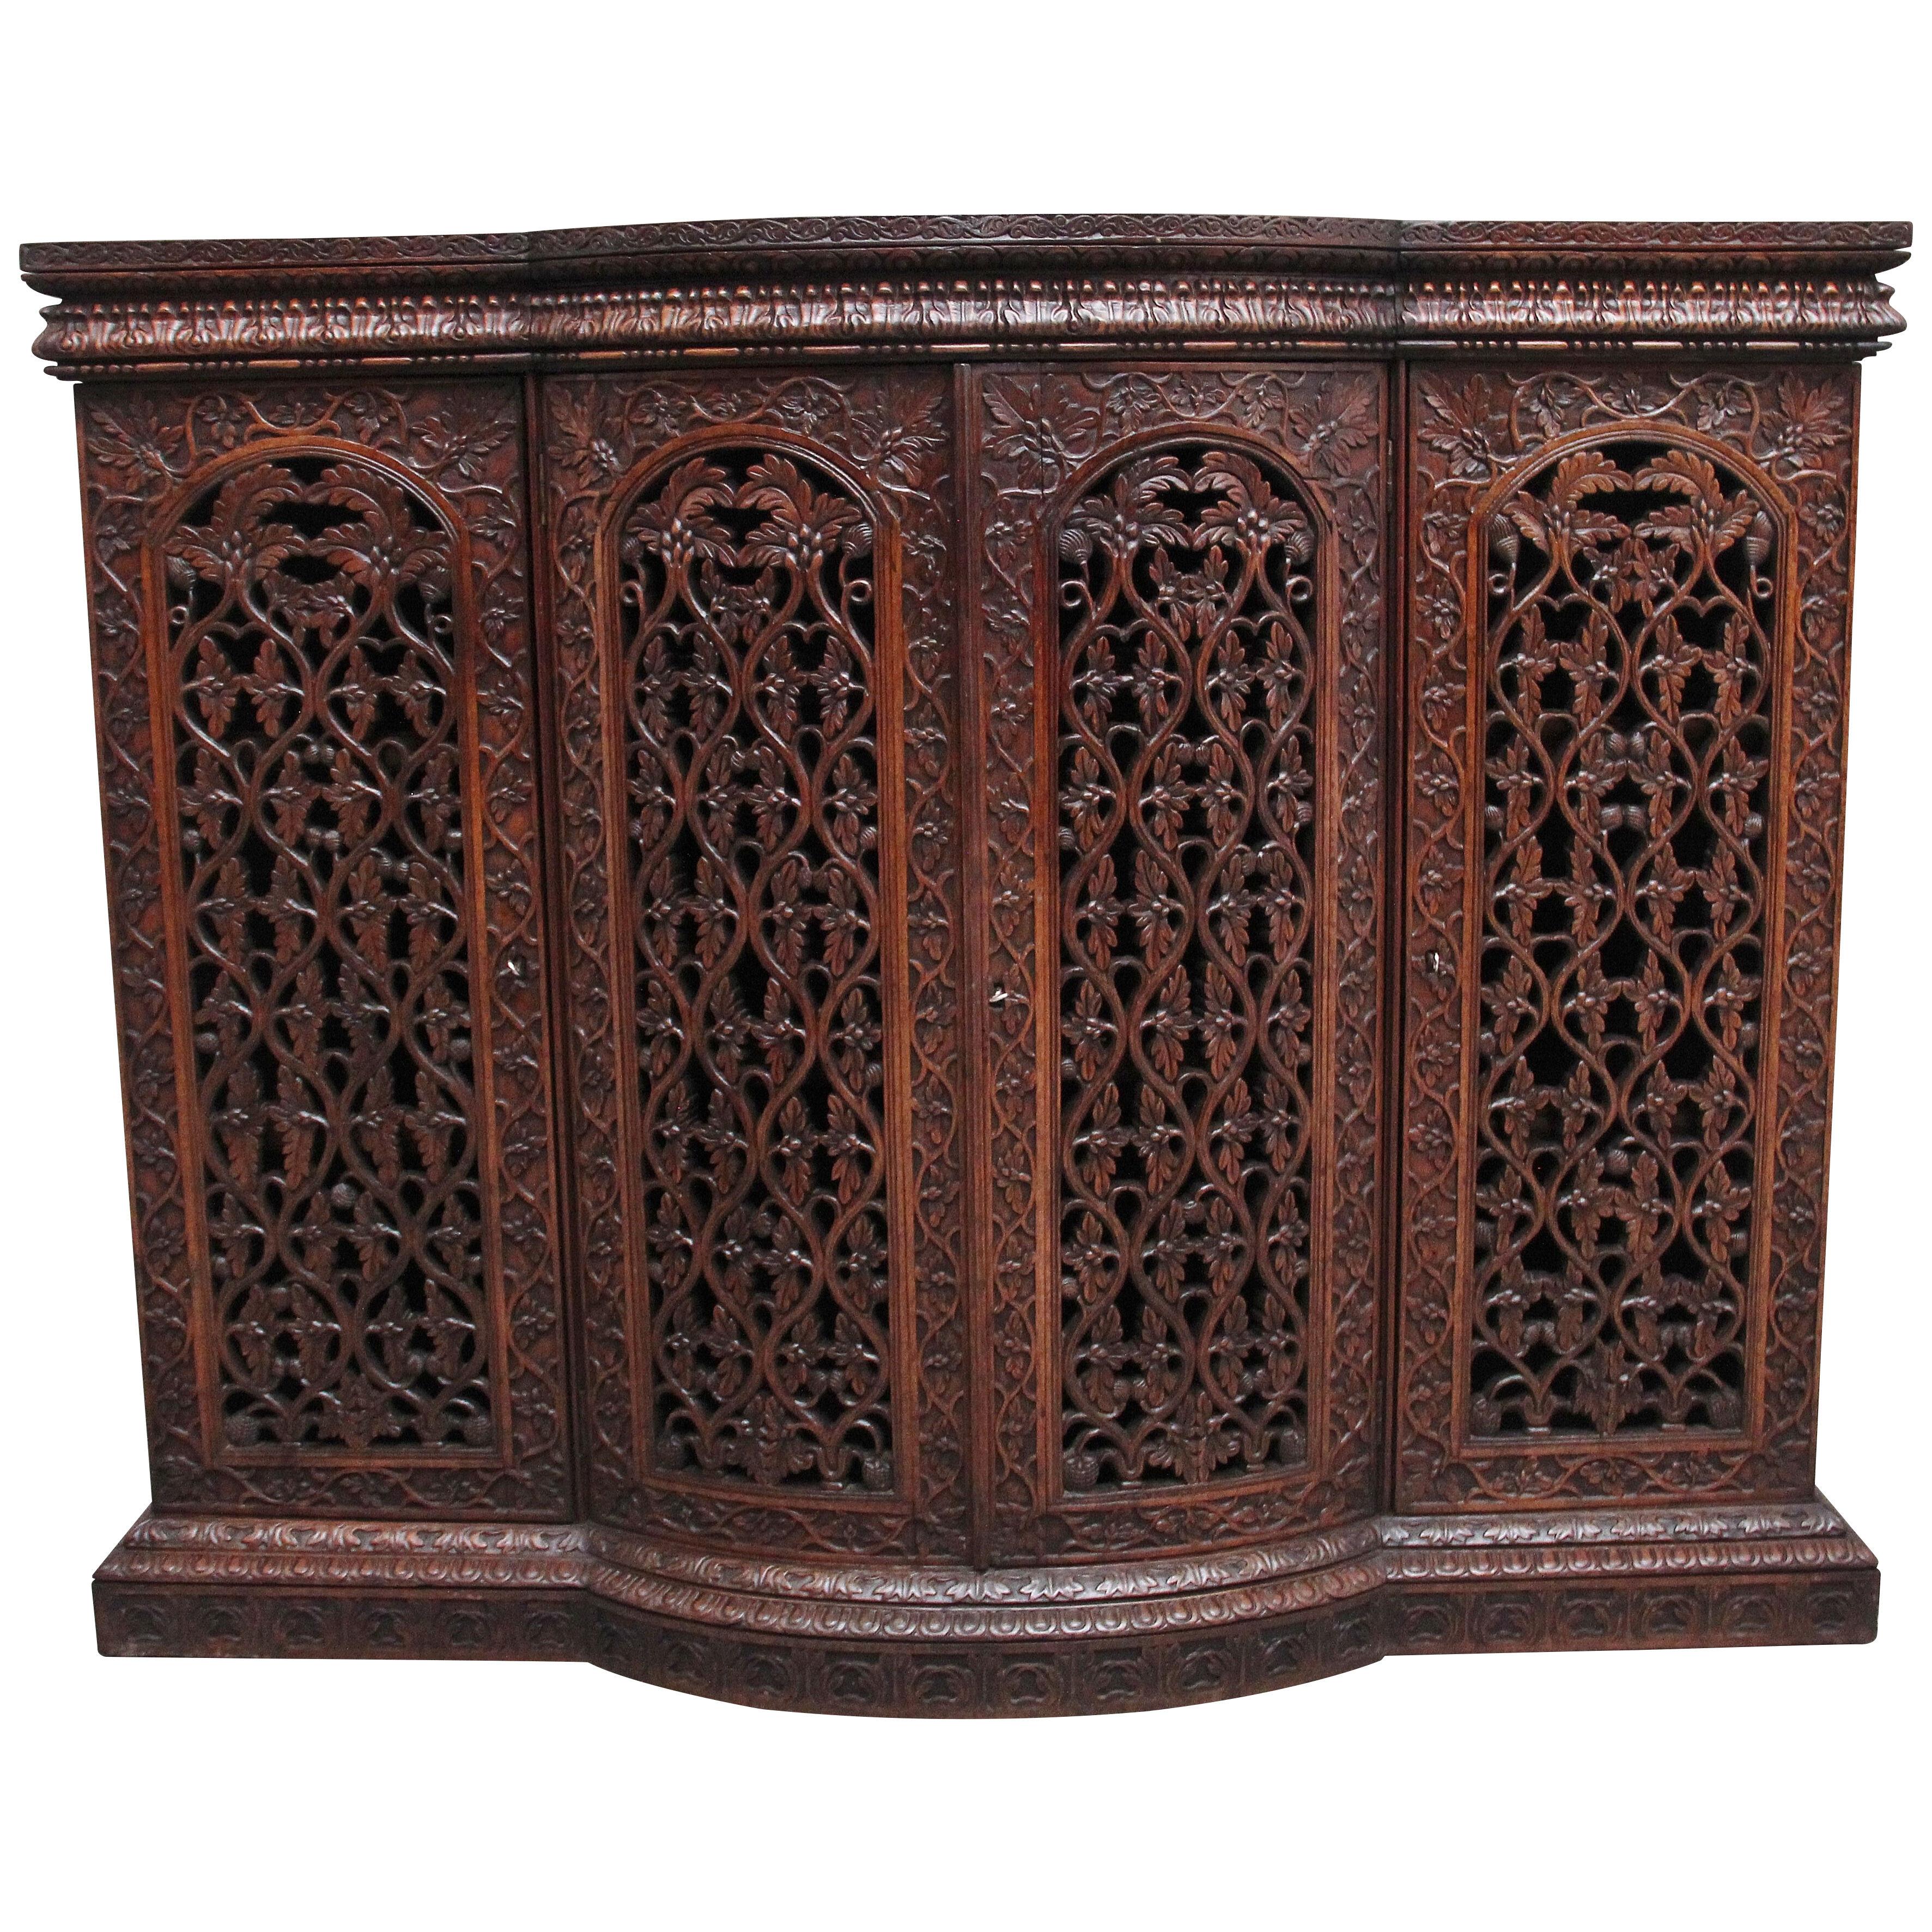 Mid 19th Century highly carved Anglo-Indian cabinet